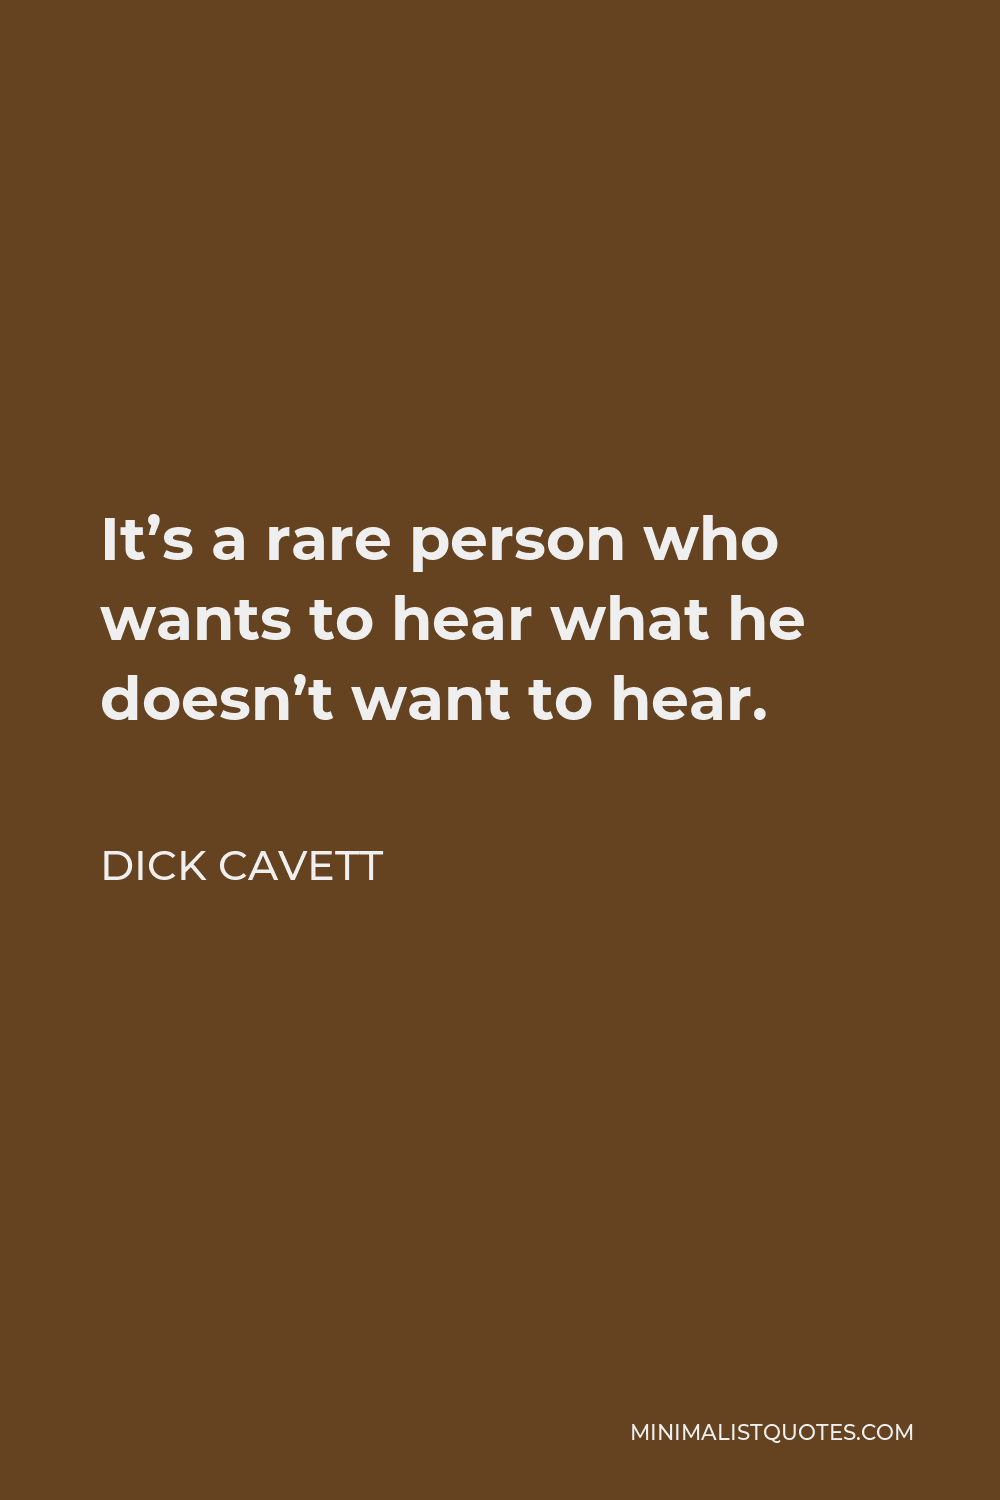 Dick Cavett Quote - It’s a rare person who wants to hear what he doesn’t want to hear.